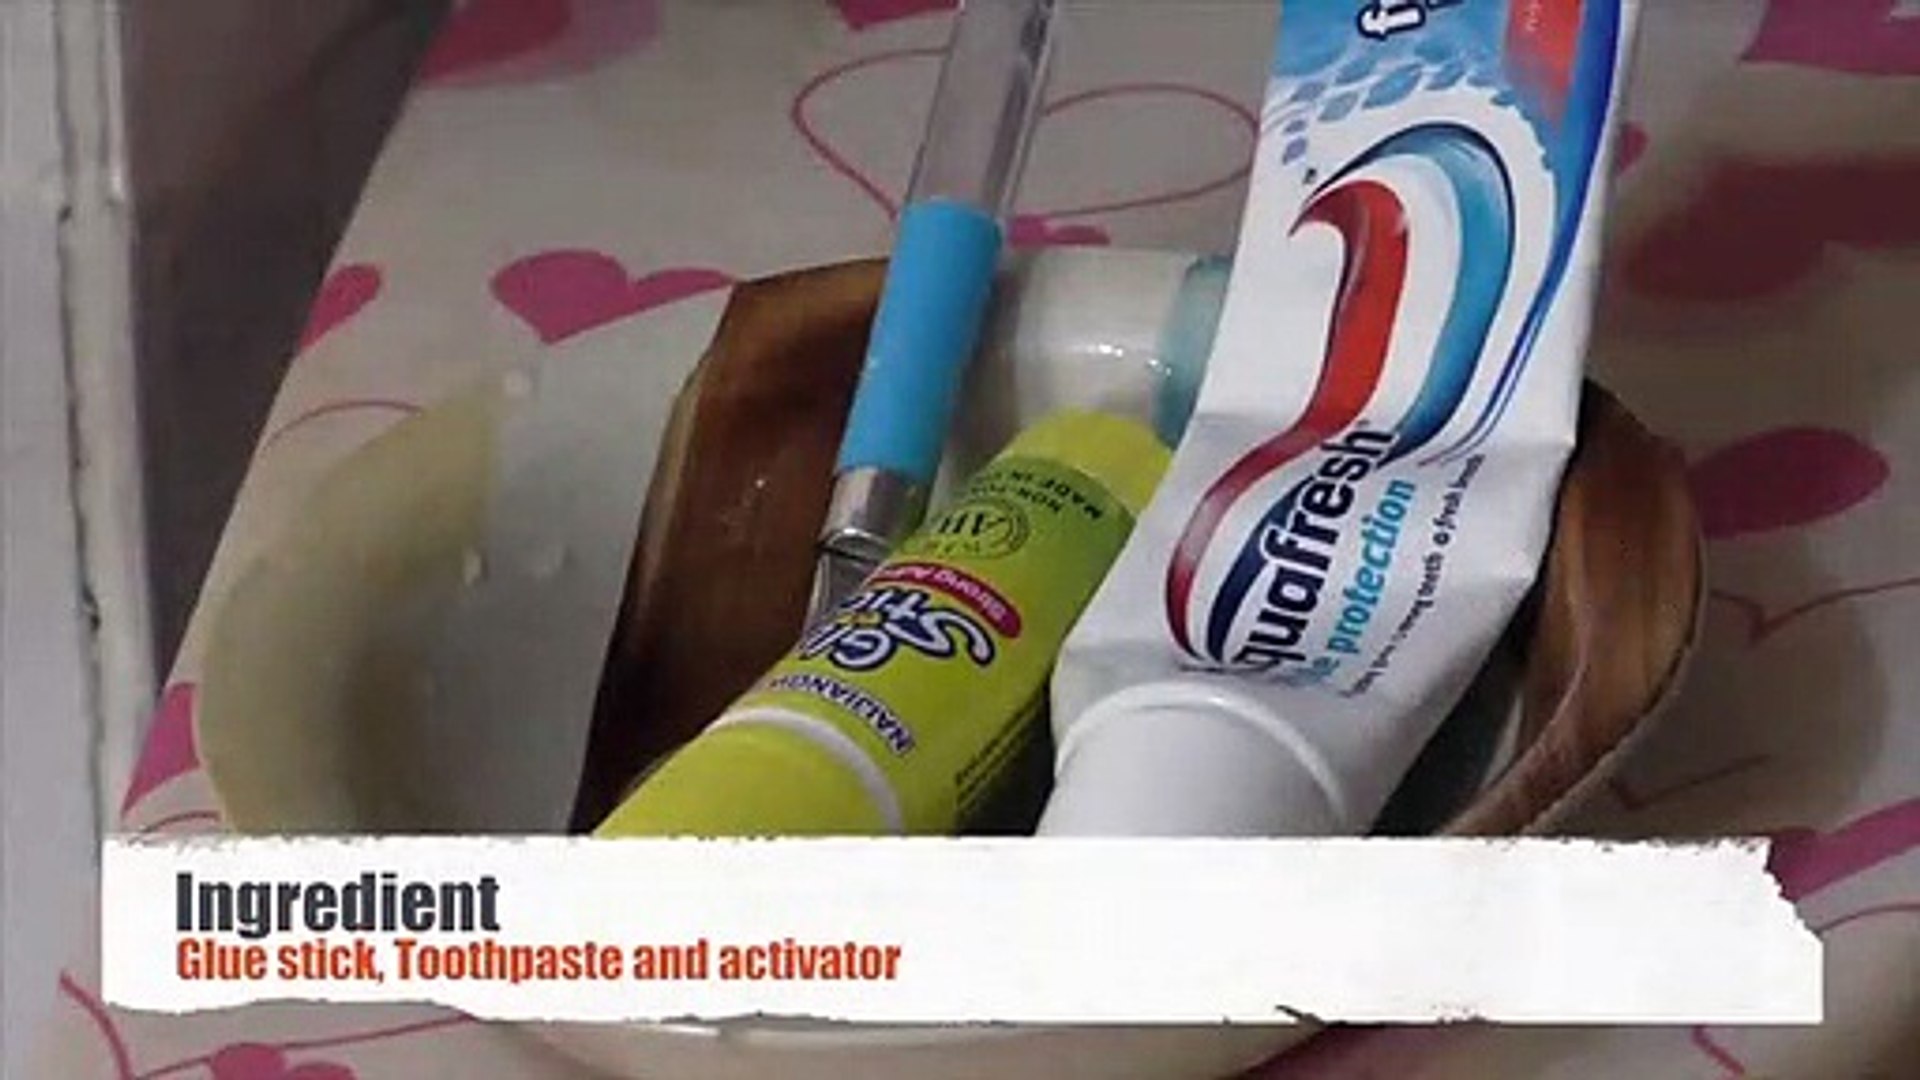 How To Make Slime With Toothpaste And Glue Stick Slime